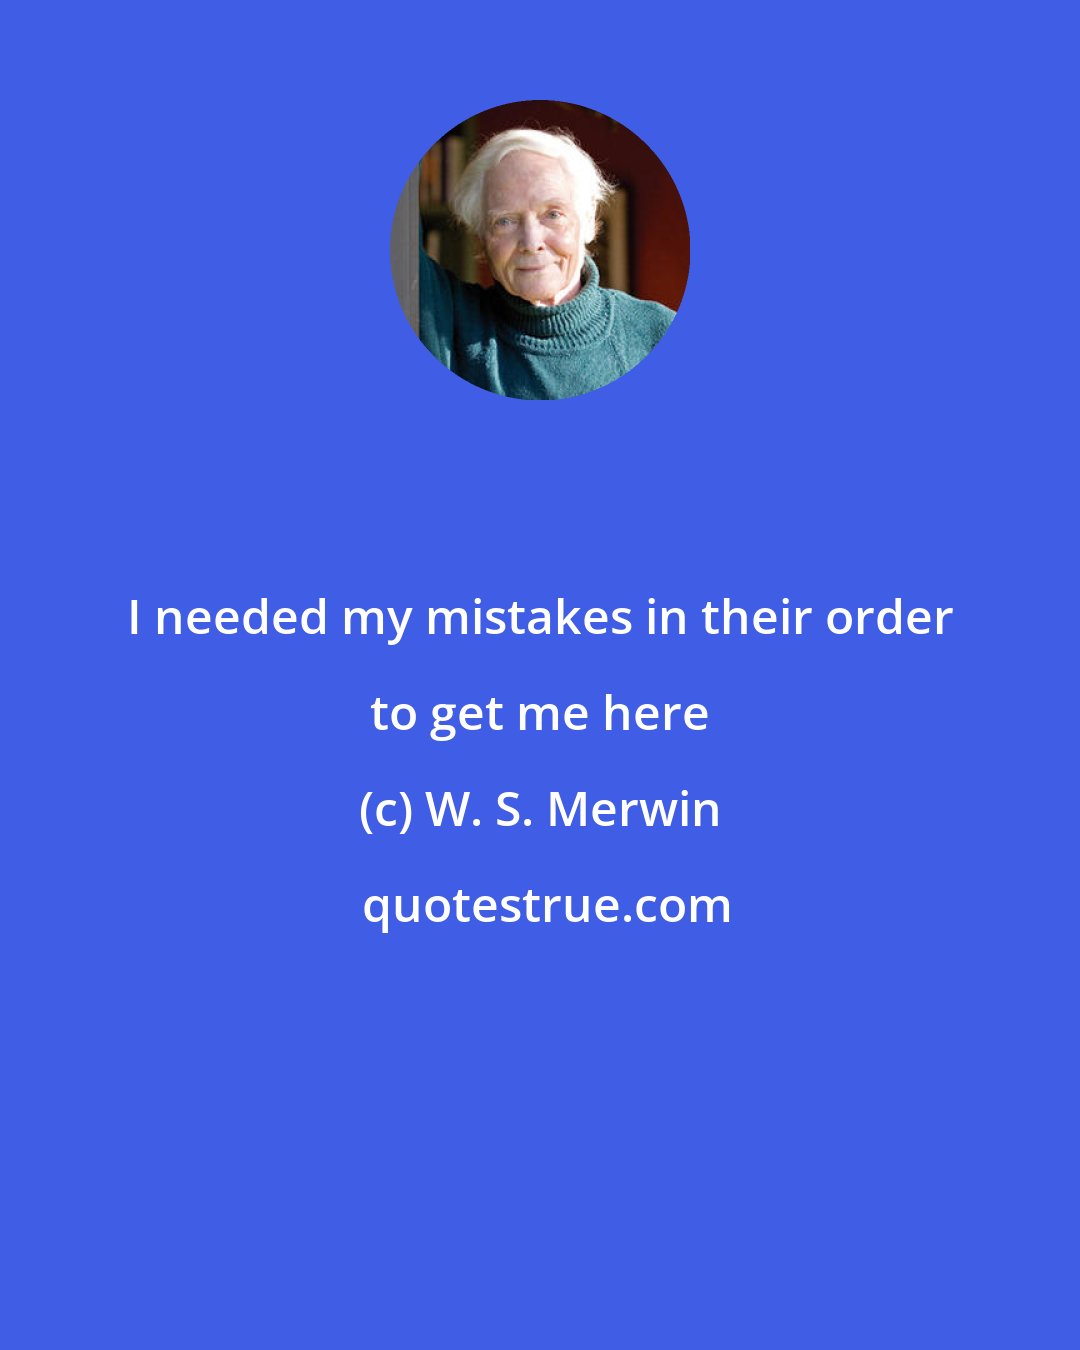 W. S. Merwin: I needed my mistakes in their order to get me here